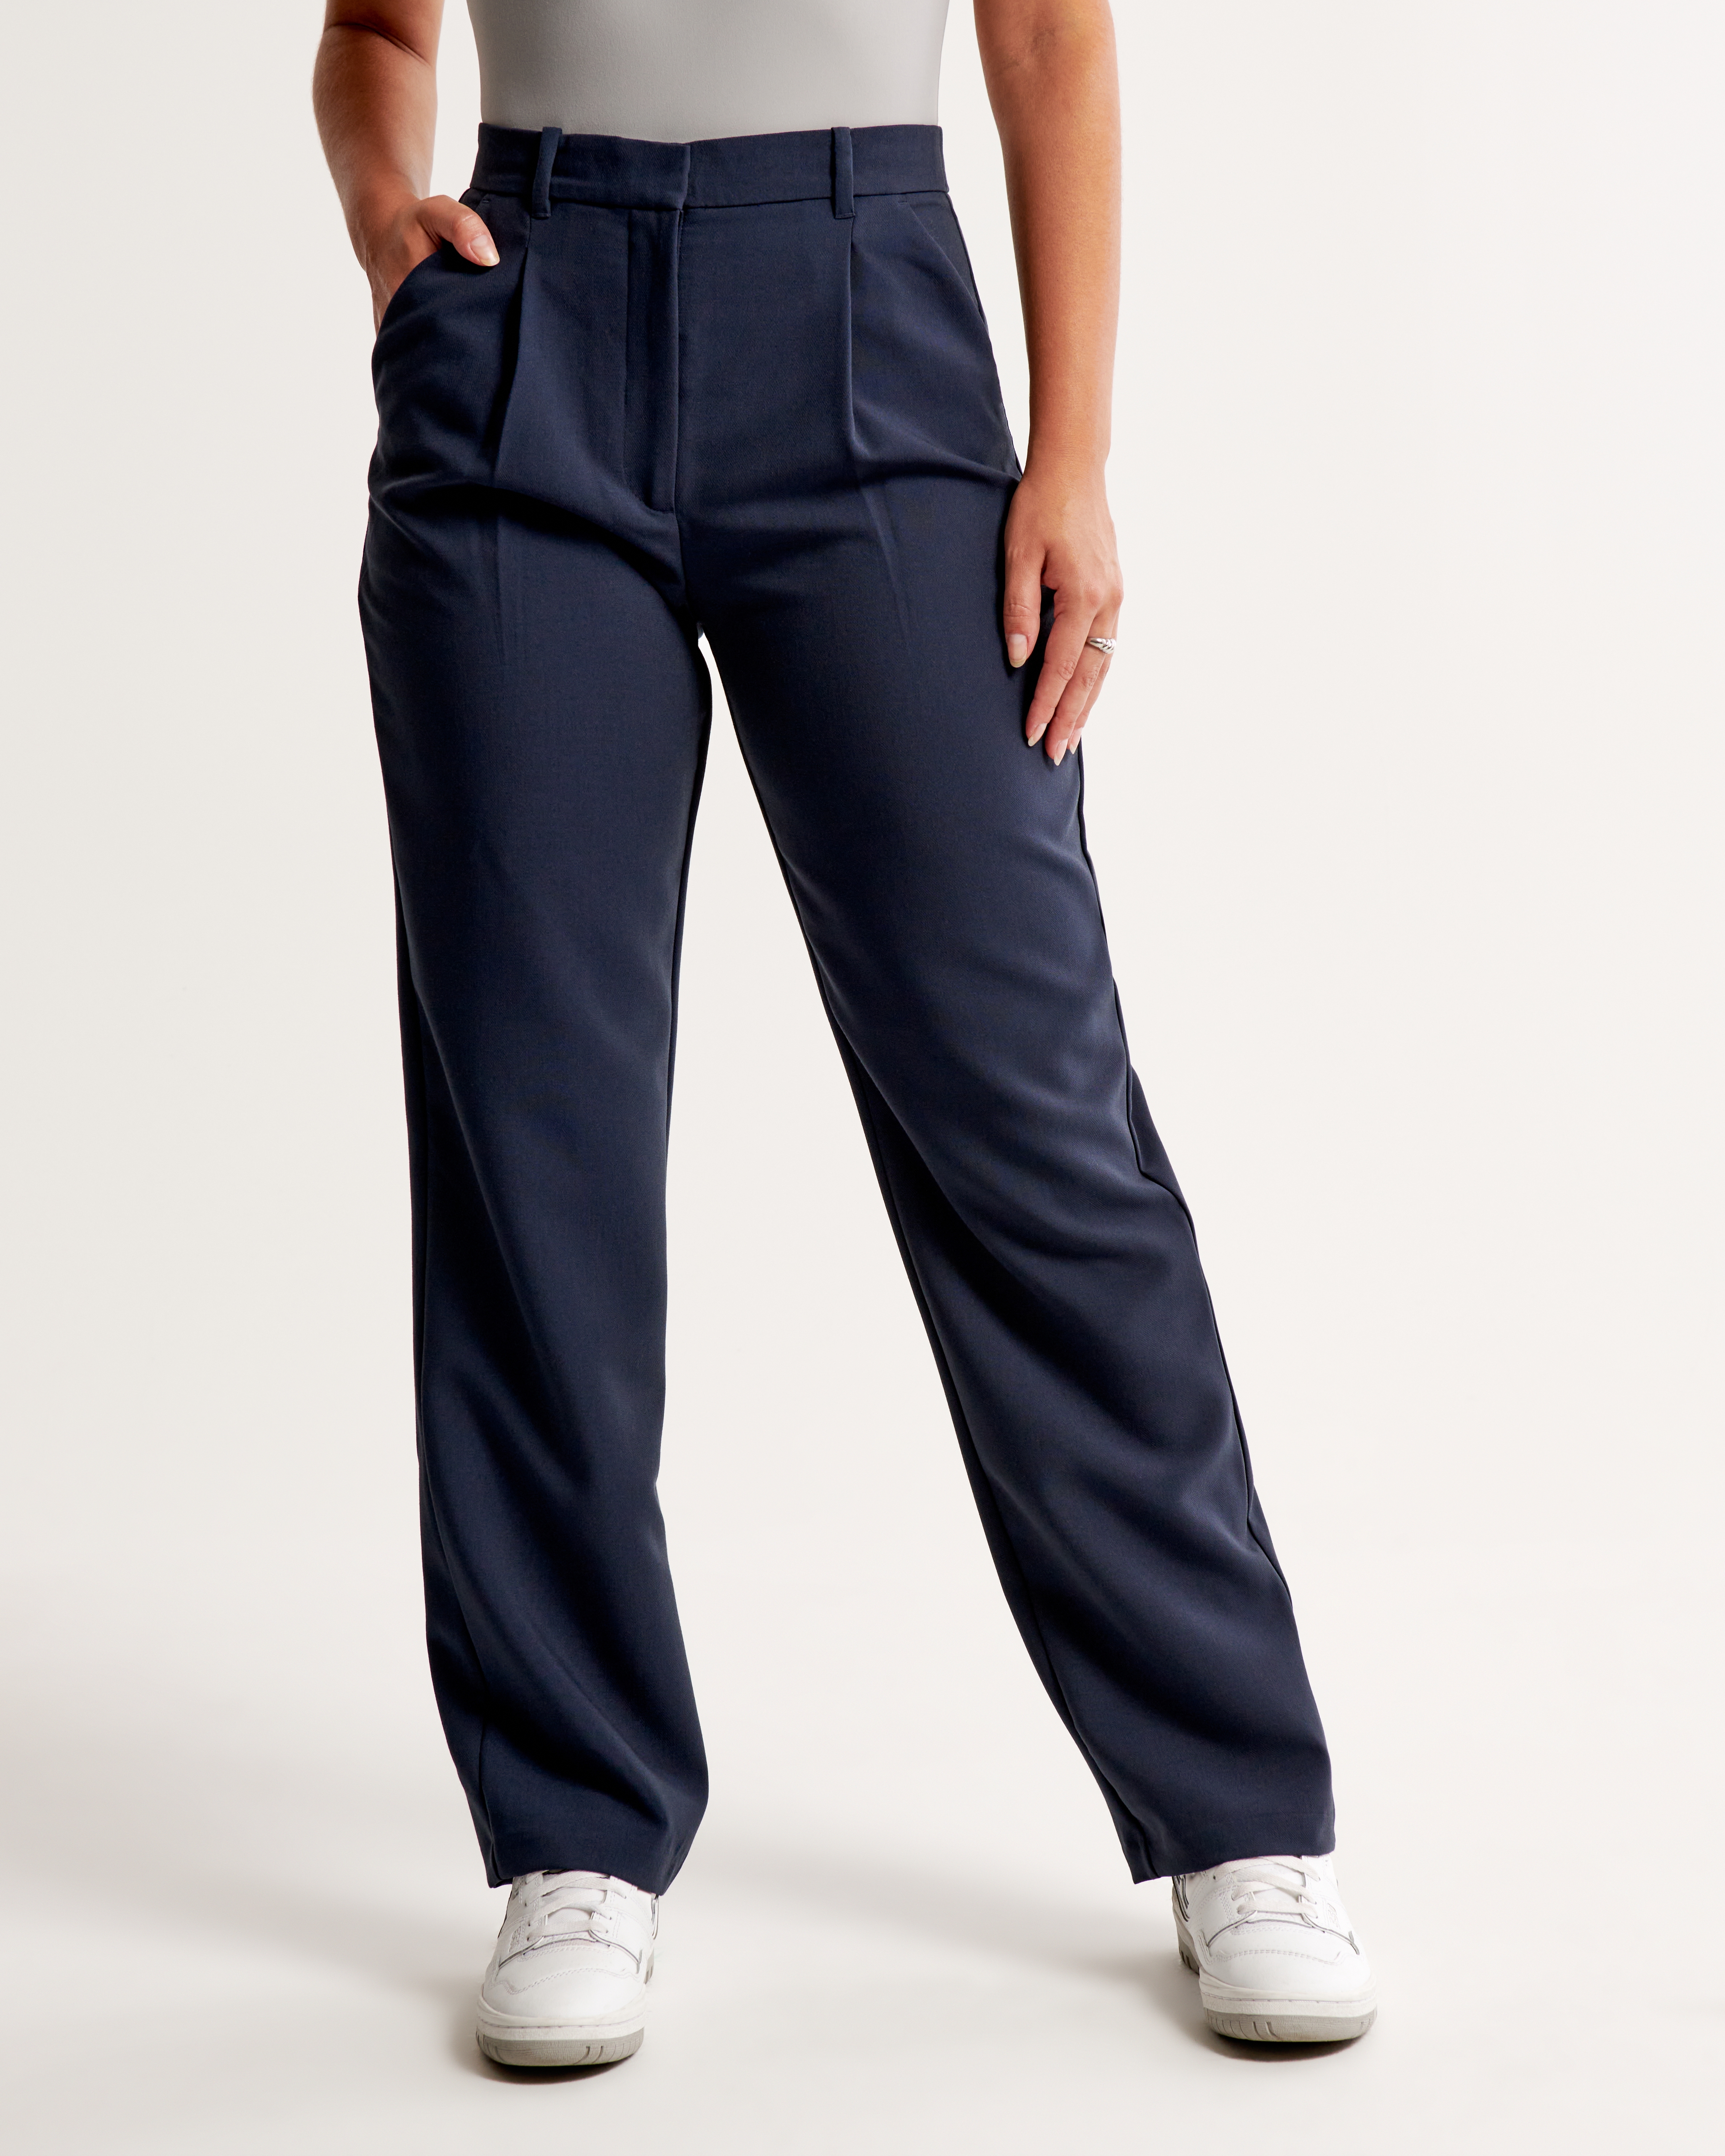 Women's Curve Love Tailored Relaxed Straight Pant | Women's